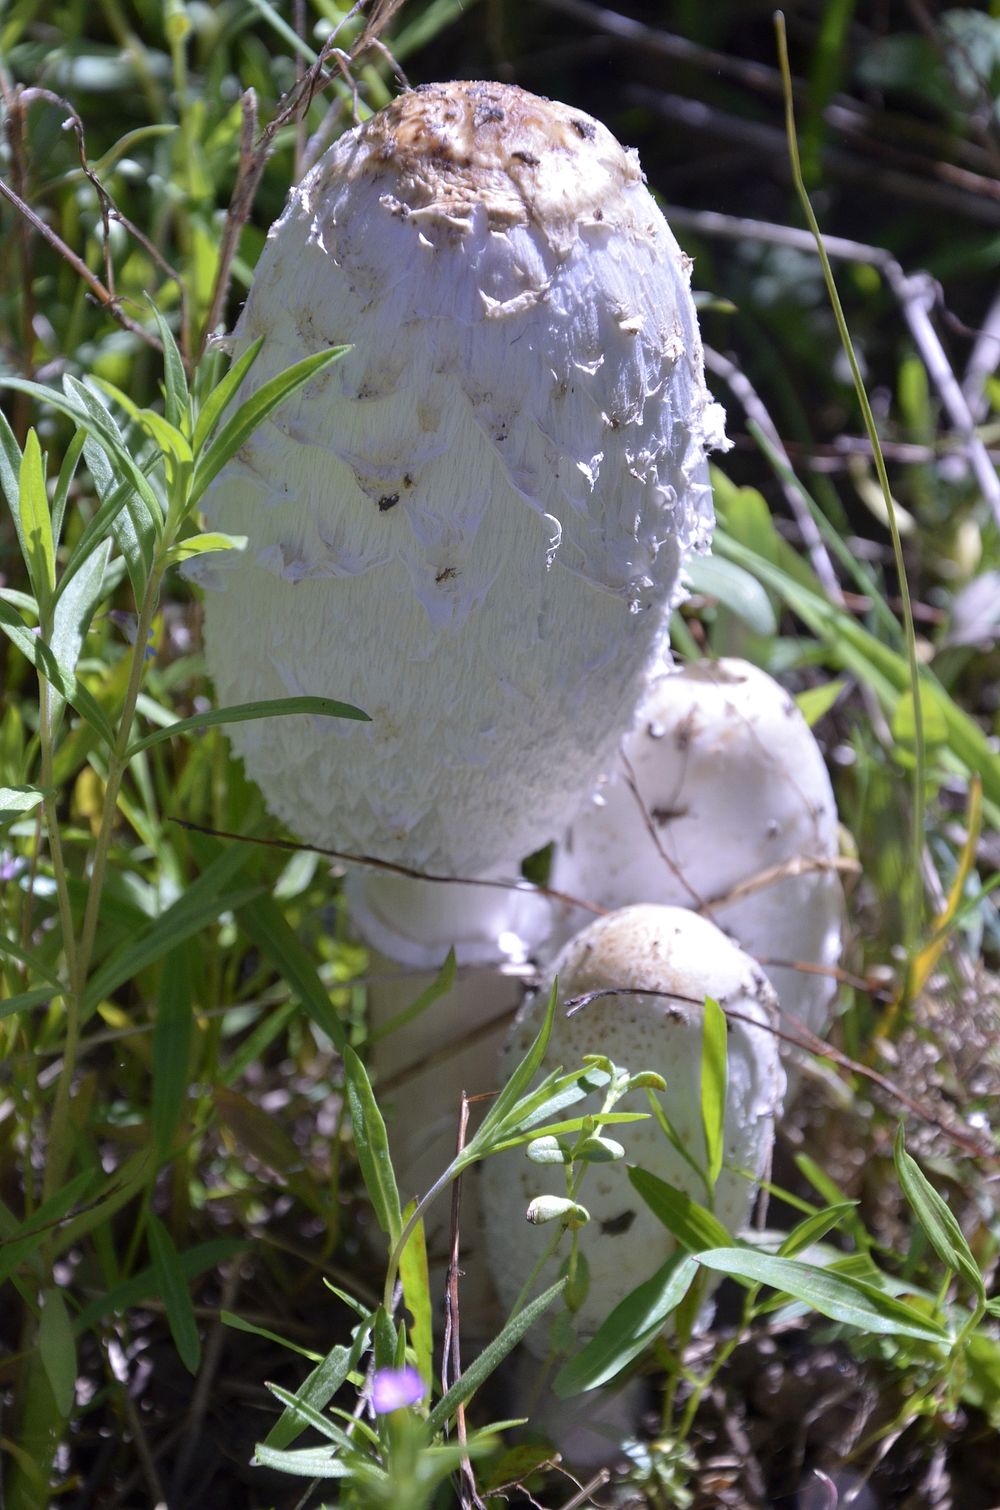 Shaggy Maine, Lawyers Wig or Inky Cap mushroom. Bozeman, MT. June 2013. Original public domain image from Flickr